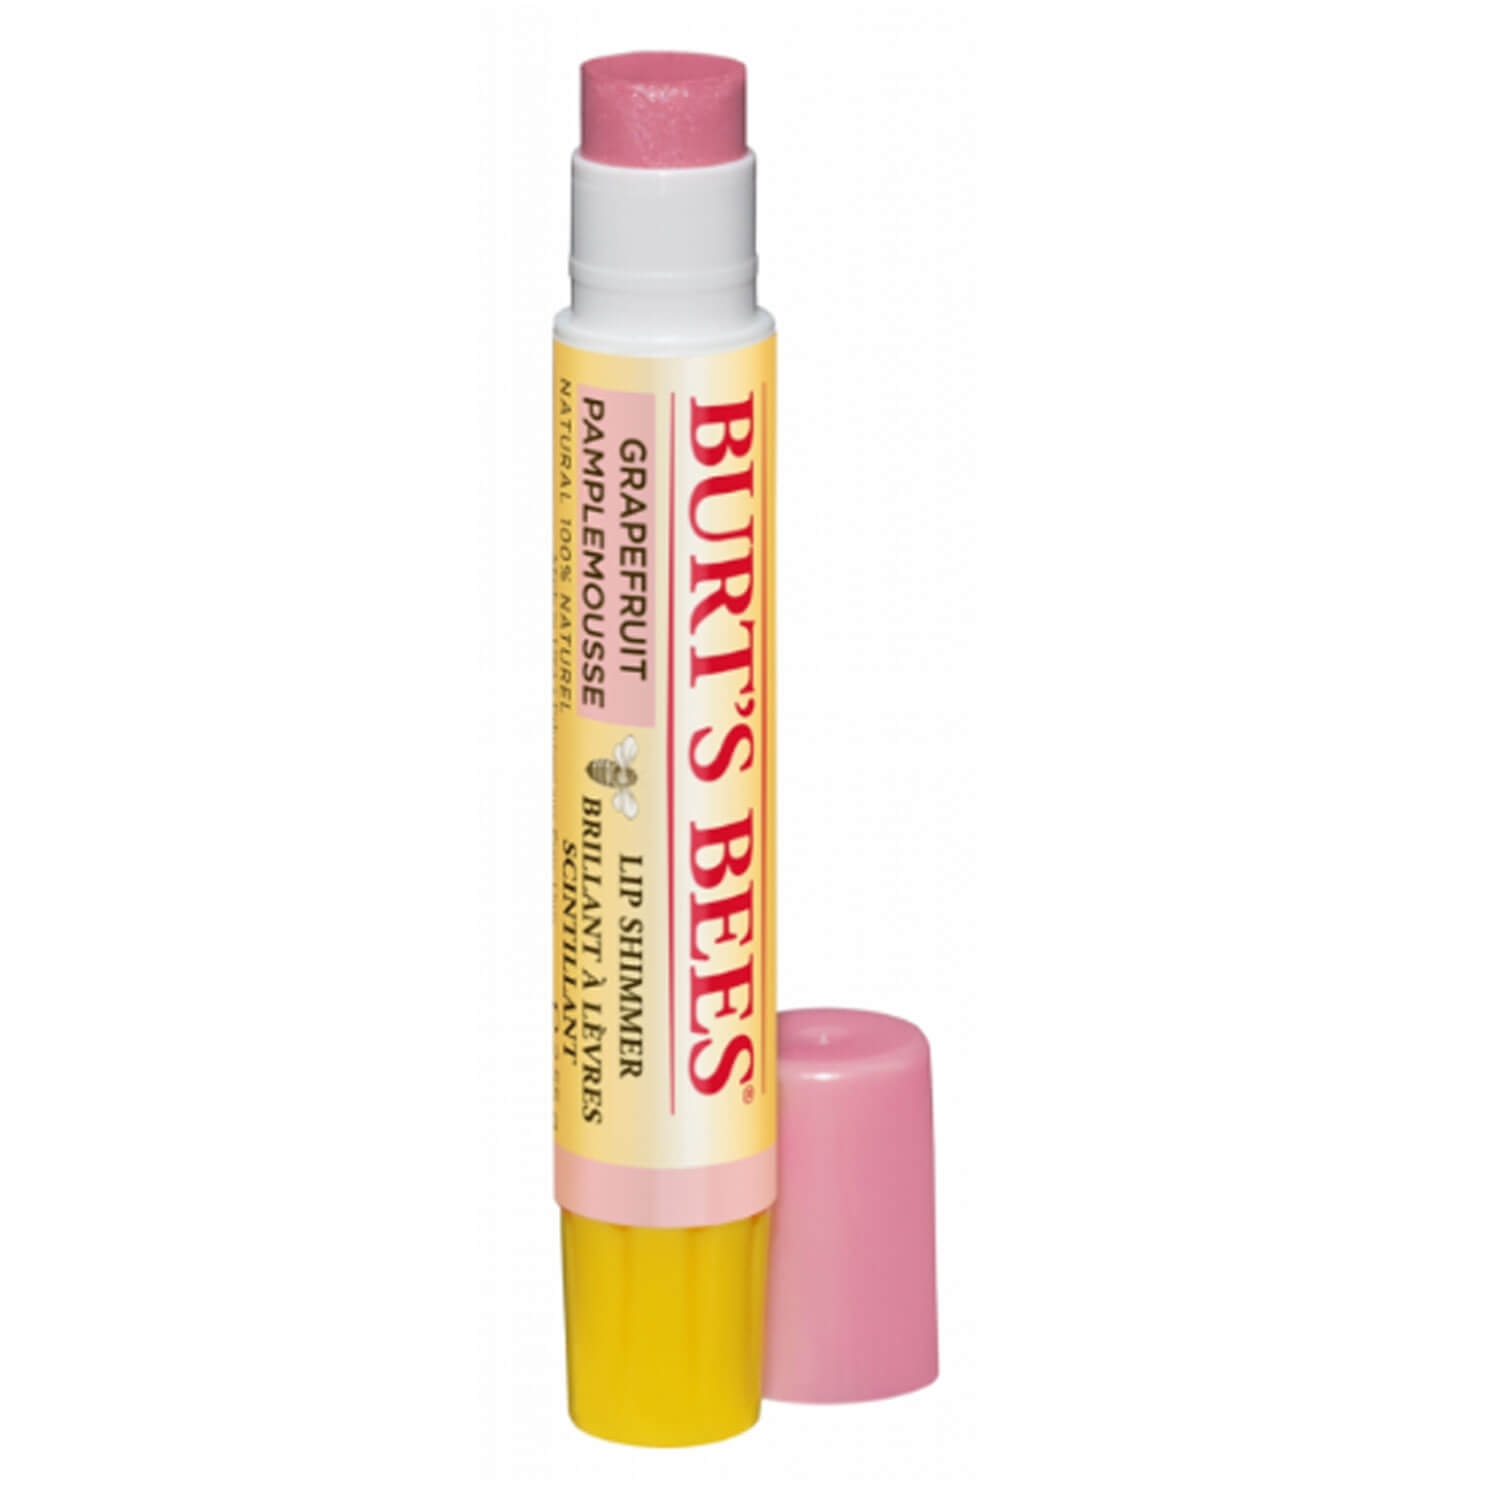 Product image from Burt's Bees - Lip Shimmer Grapefruit